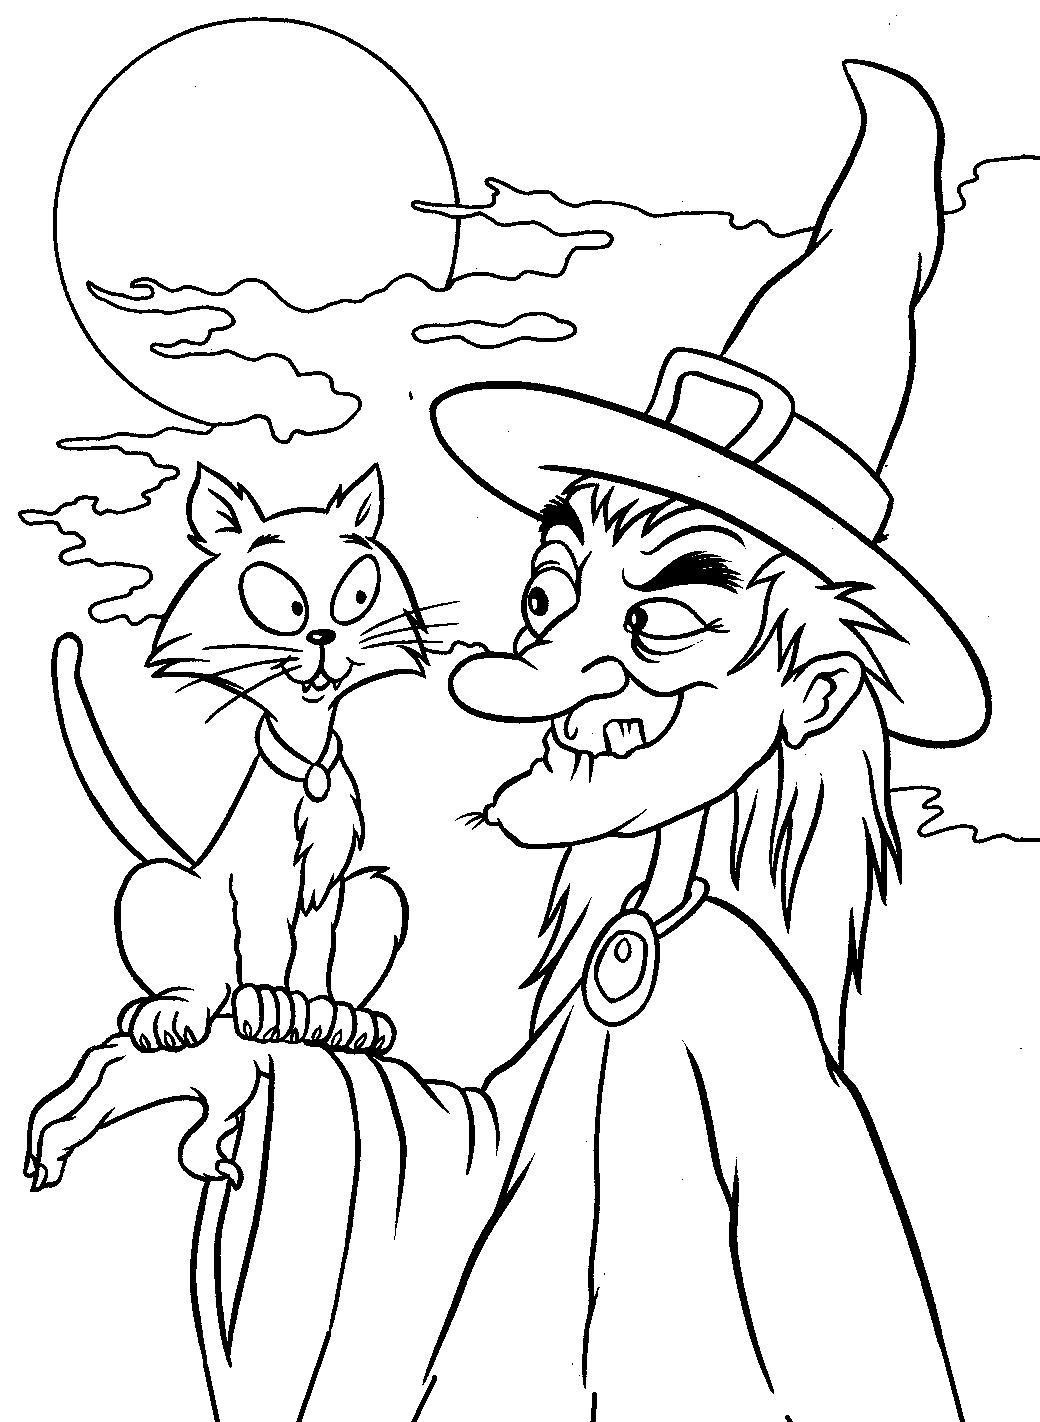 Coloring Pages Print Out Witch Halloween Coloring Page